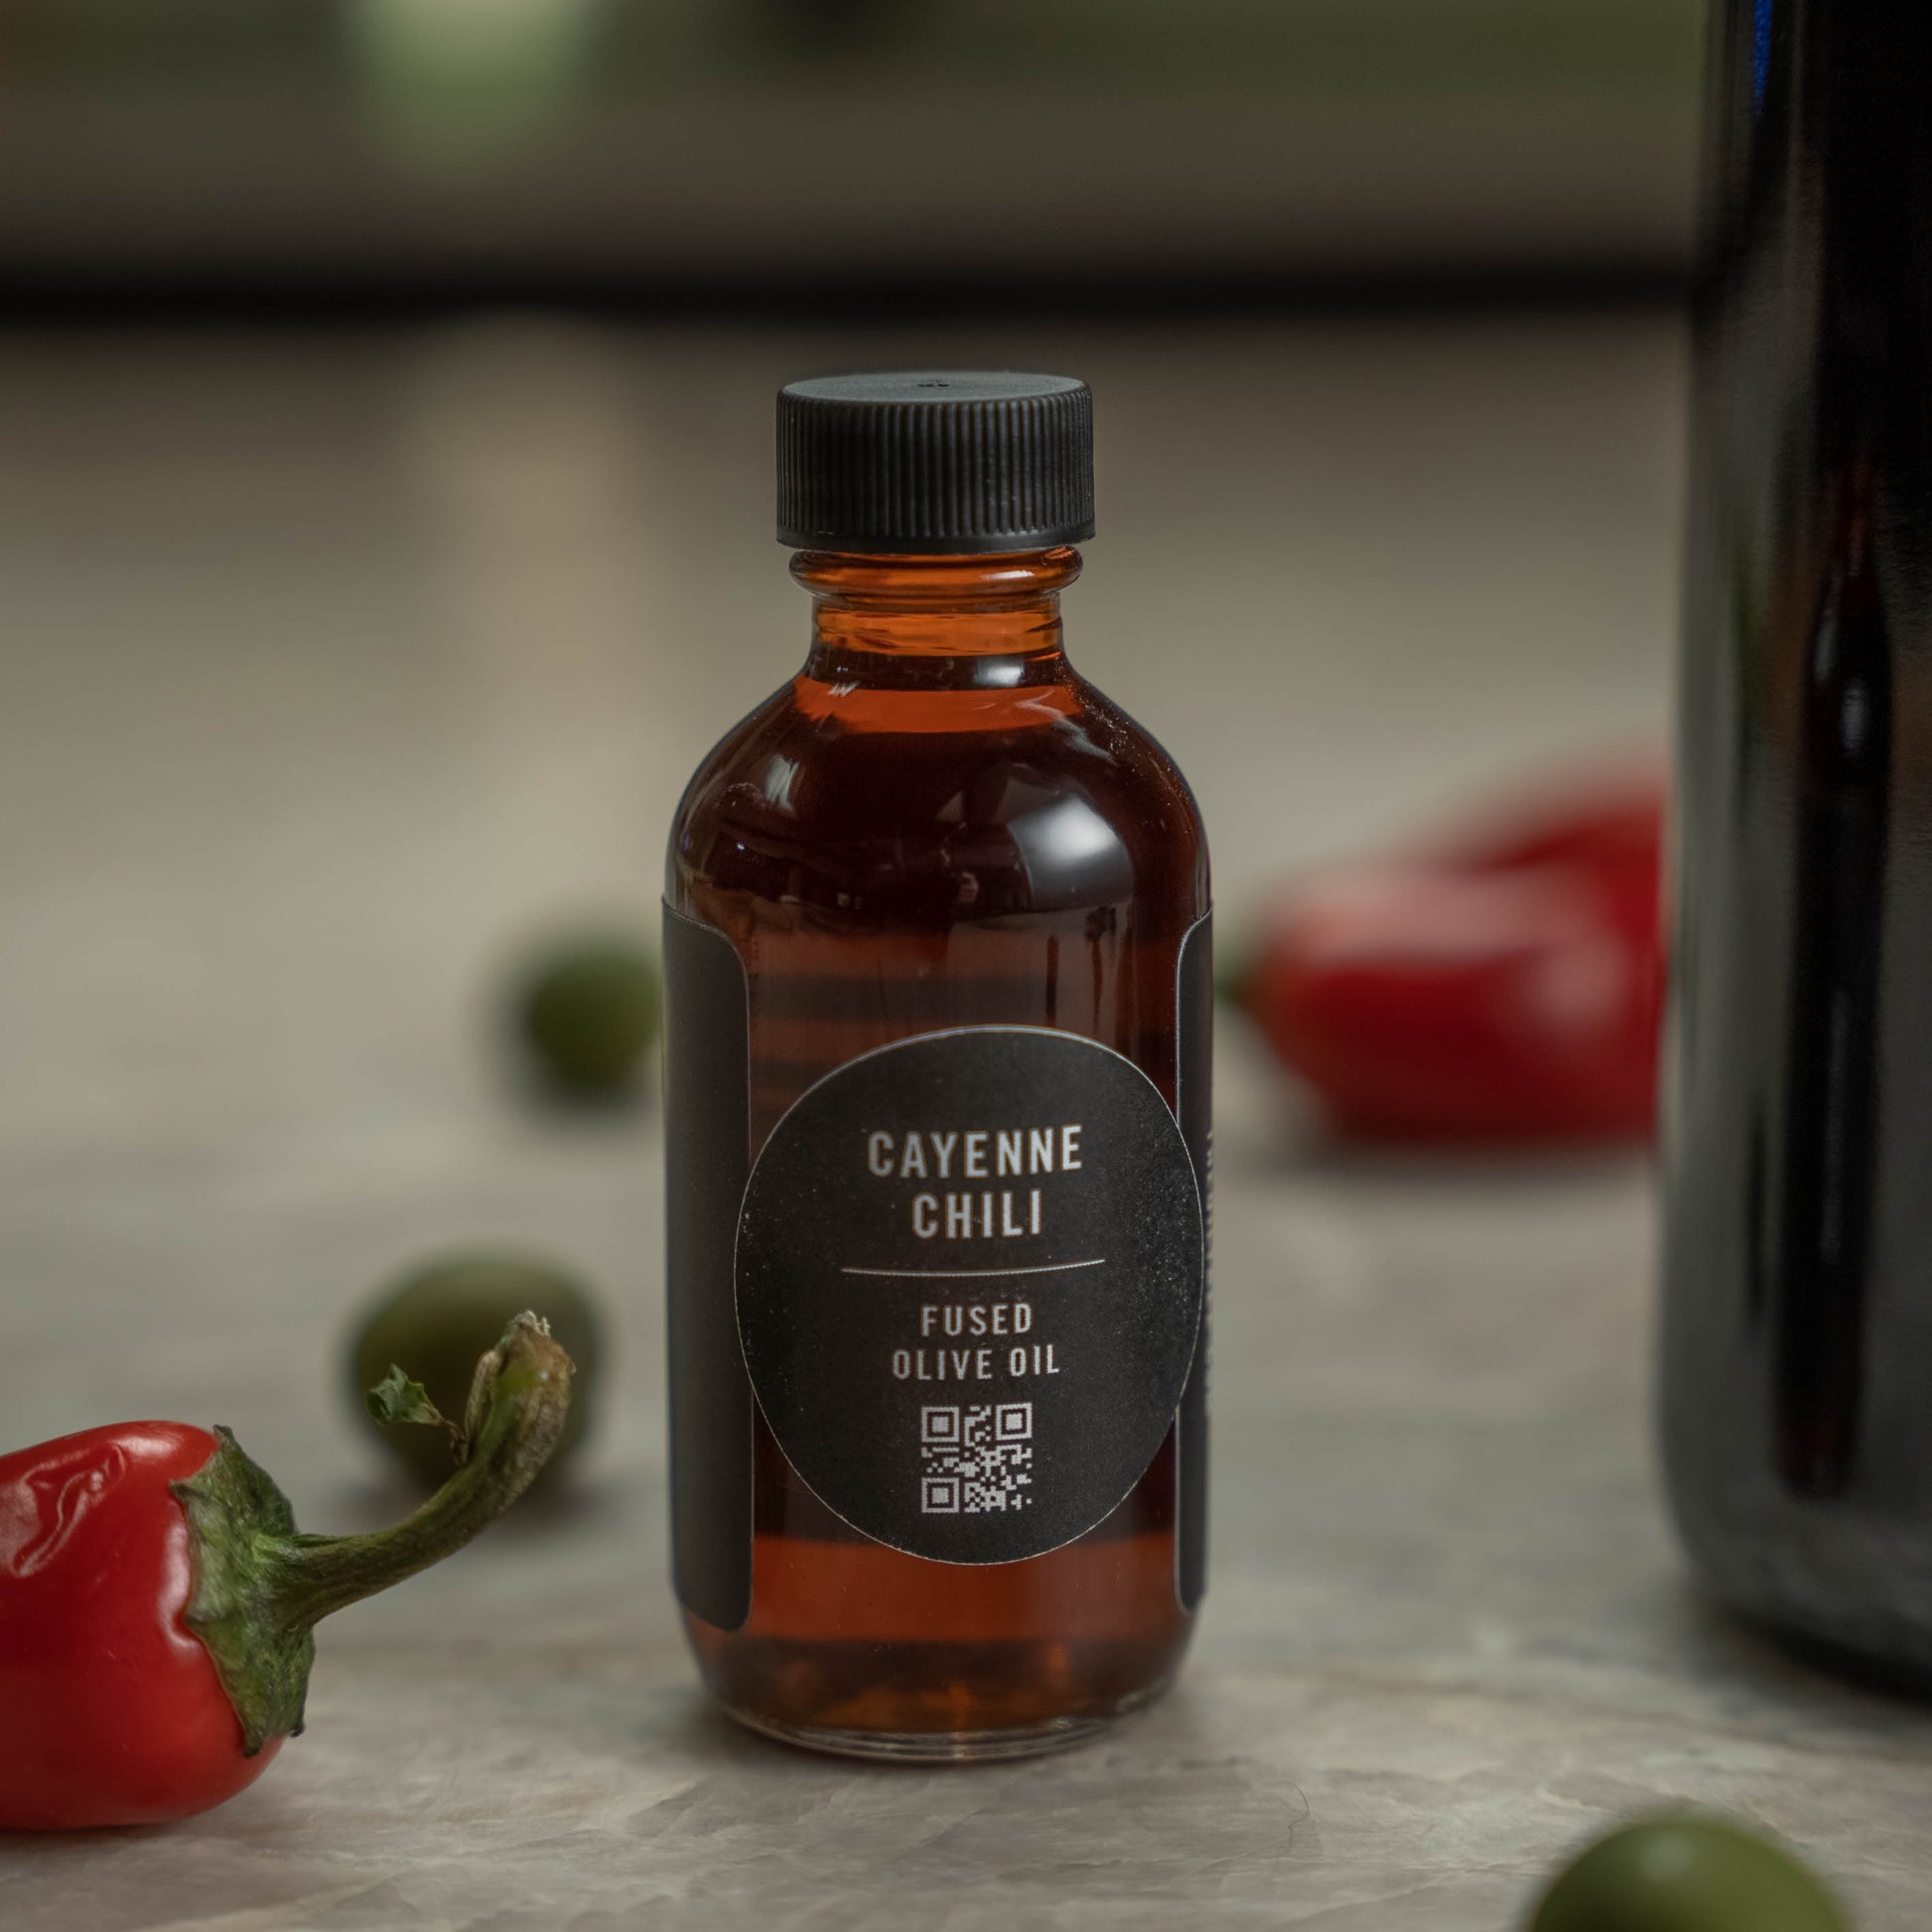 Cayenne Chili Fused Olive Oil